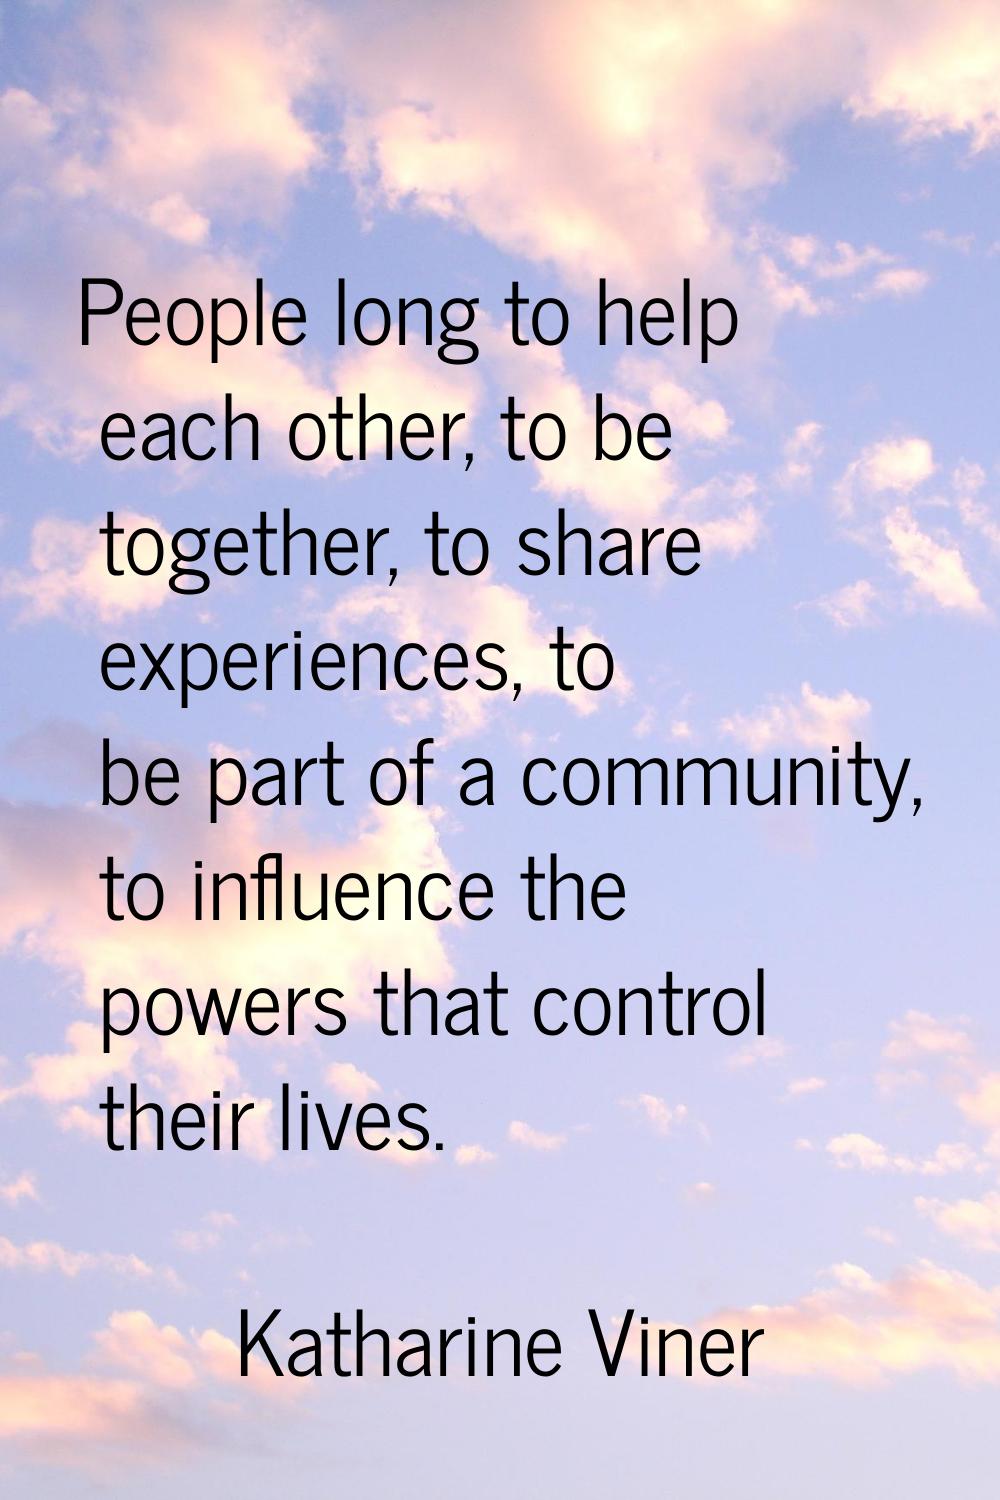 People long to help each other, to be together, to share experiences, to be part of a community, to